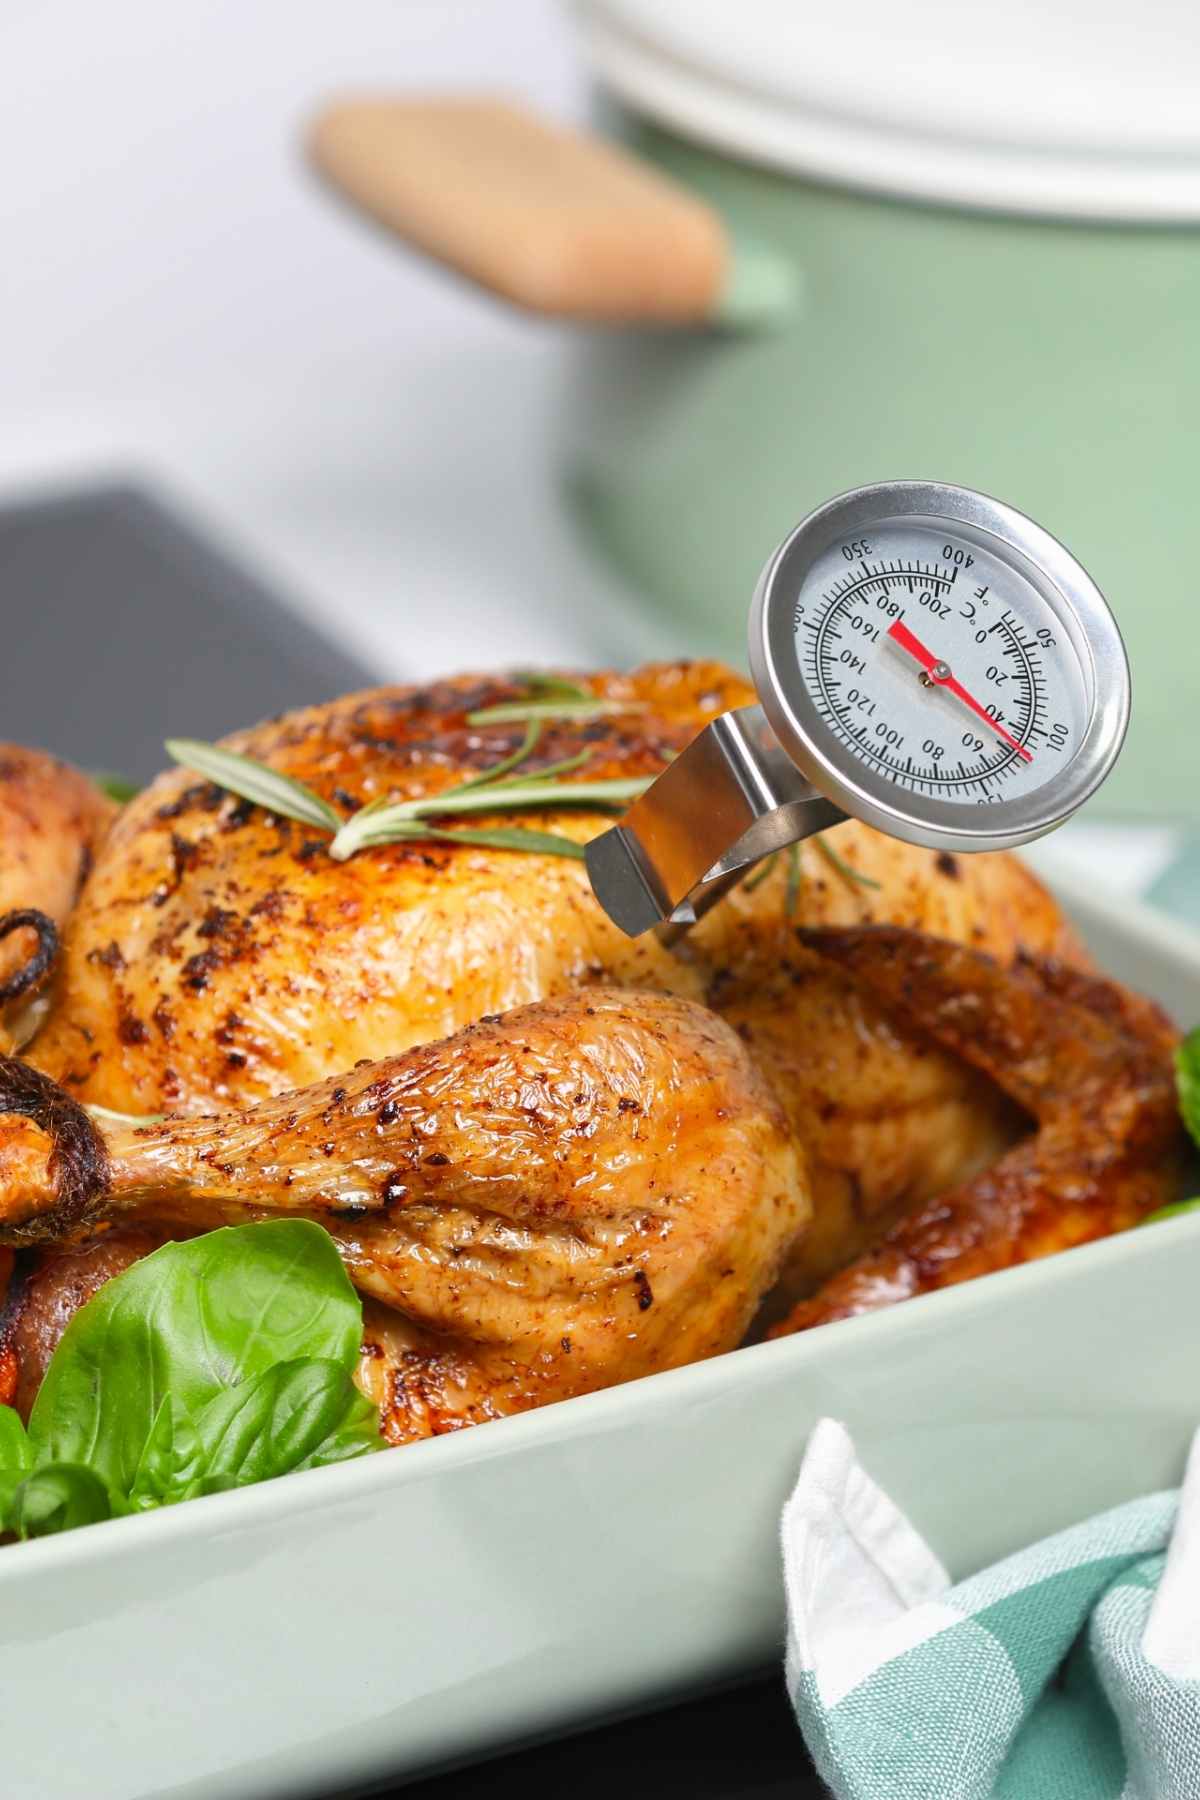 An important part of cooking a turkey is to know when it is done cooking. Properly cooked turkey is tender, juicy, and delicious. In this post, you’ll find how to cook the bird properly with the right internal temperature.